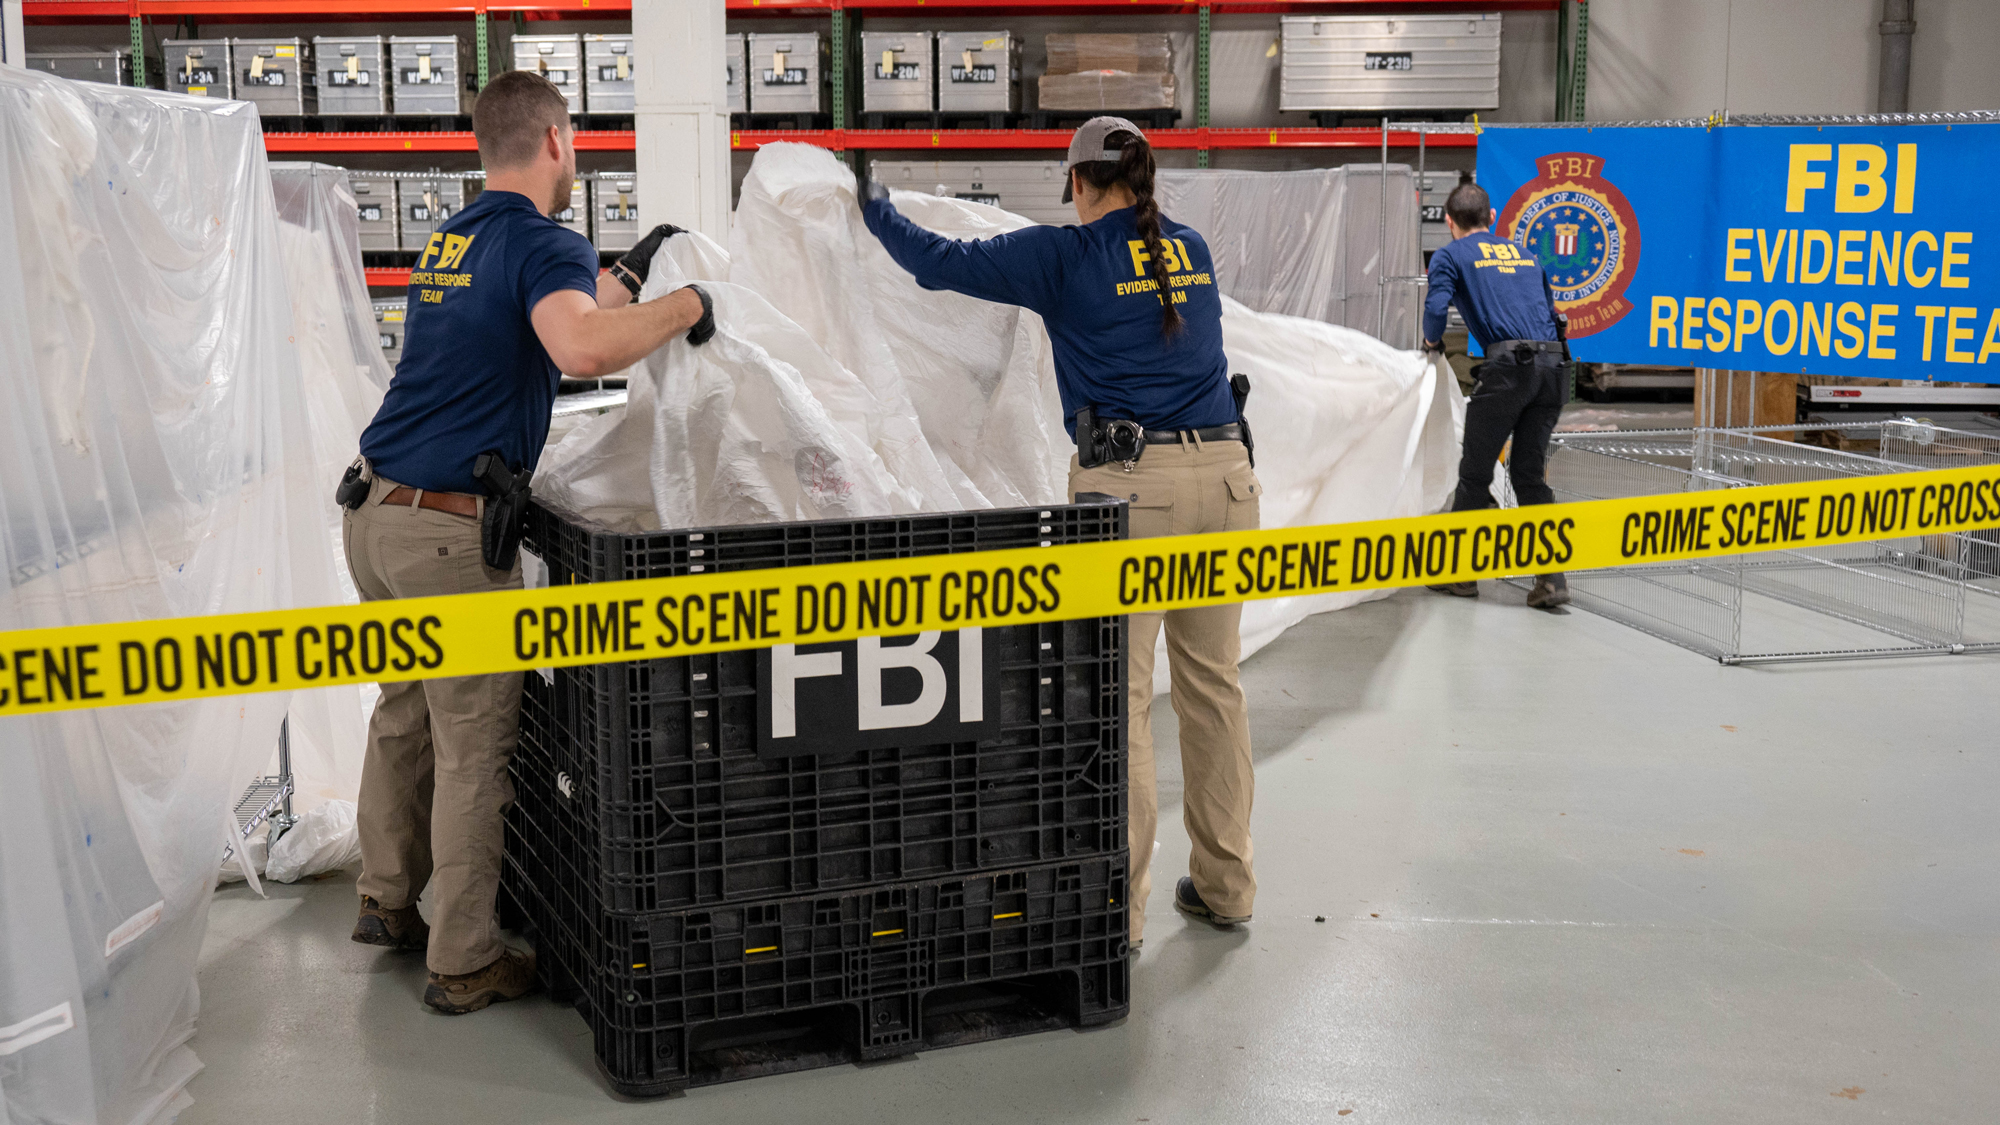 FBI Special Agents assigned to the Evidence Response Team process material recovered from the High Altitude Balloon recovered off the coast of South Carolina. The material was processed and transported to the FBI Laboratory in Quantico, Virginia.